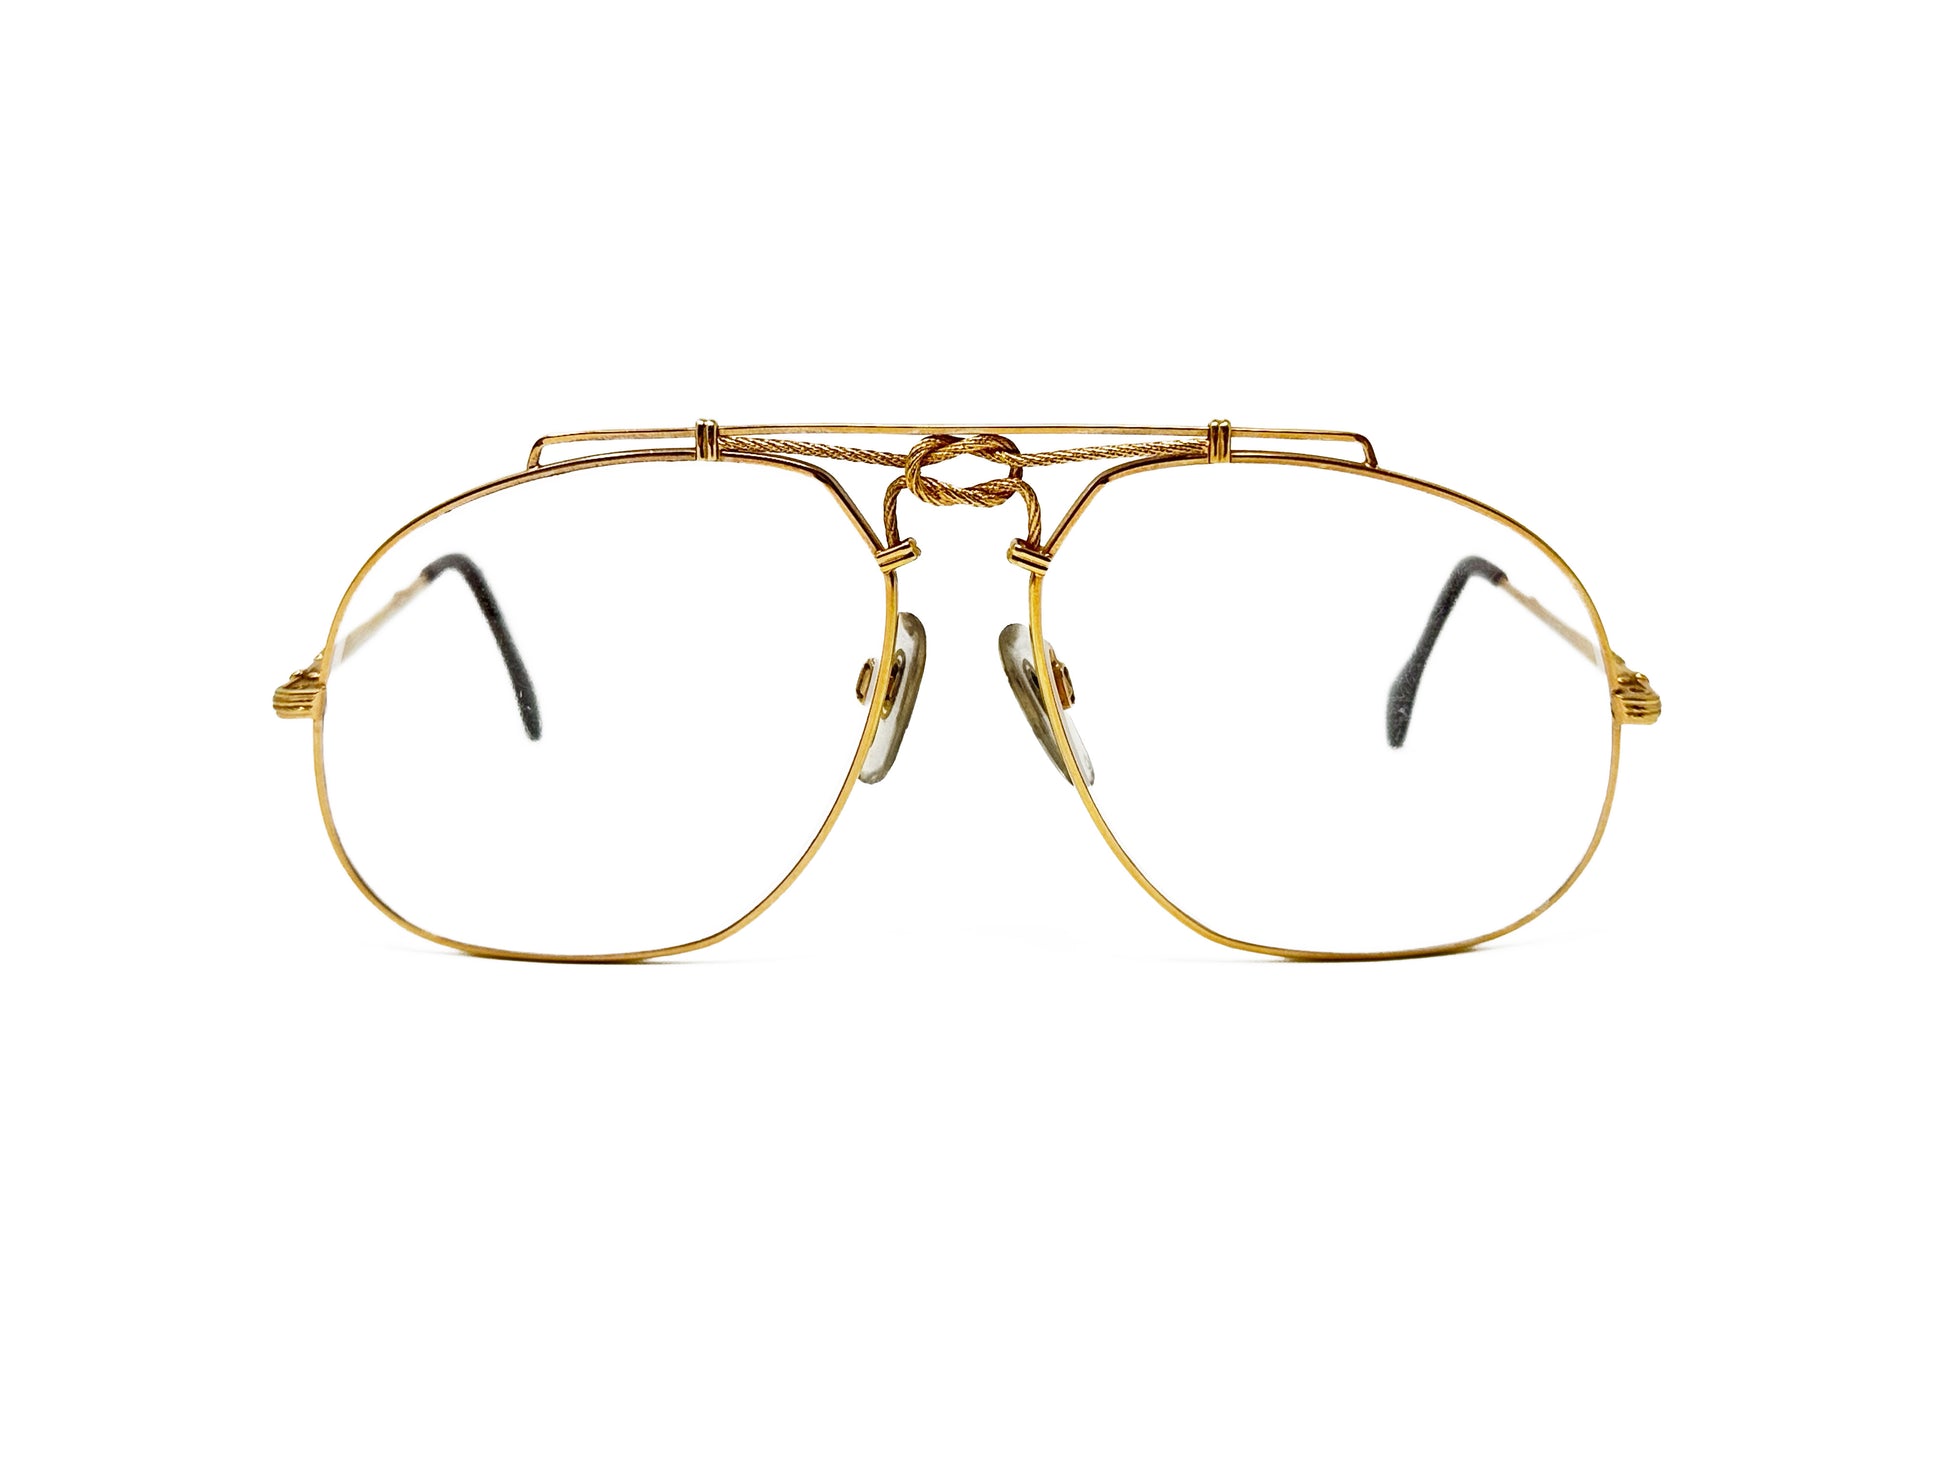 Zollitsch rounded, downward sloped aviator style, metal optical frame with nautical rope featured on bridge. Model: Jawl. Color: 901 - Gold. Front view. 